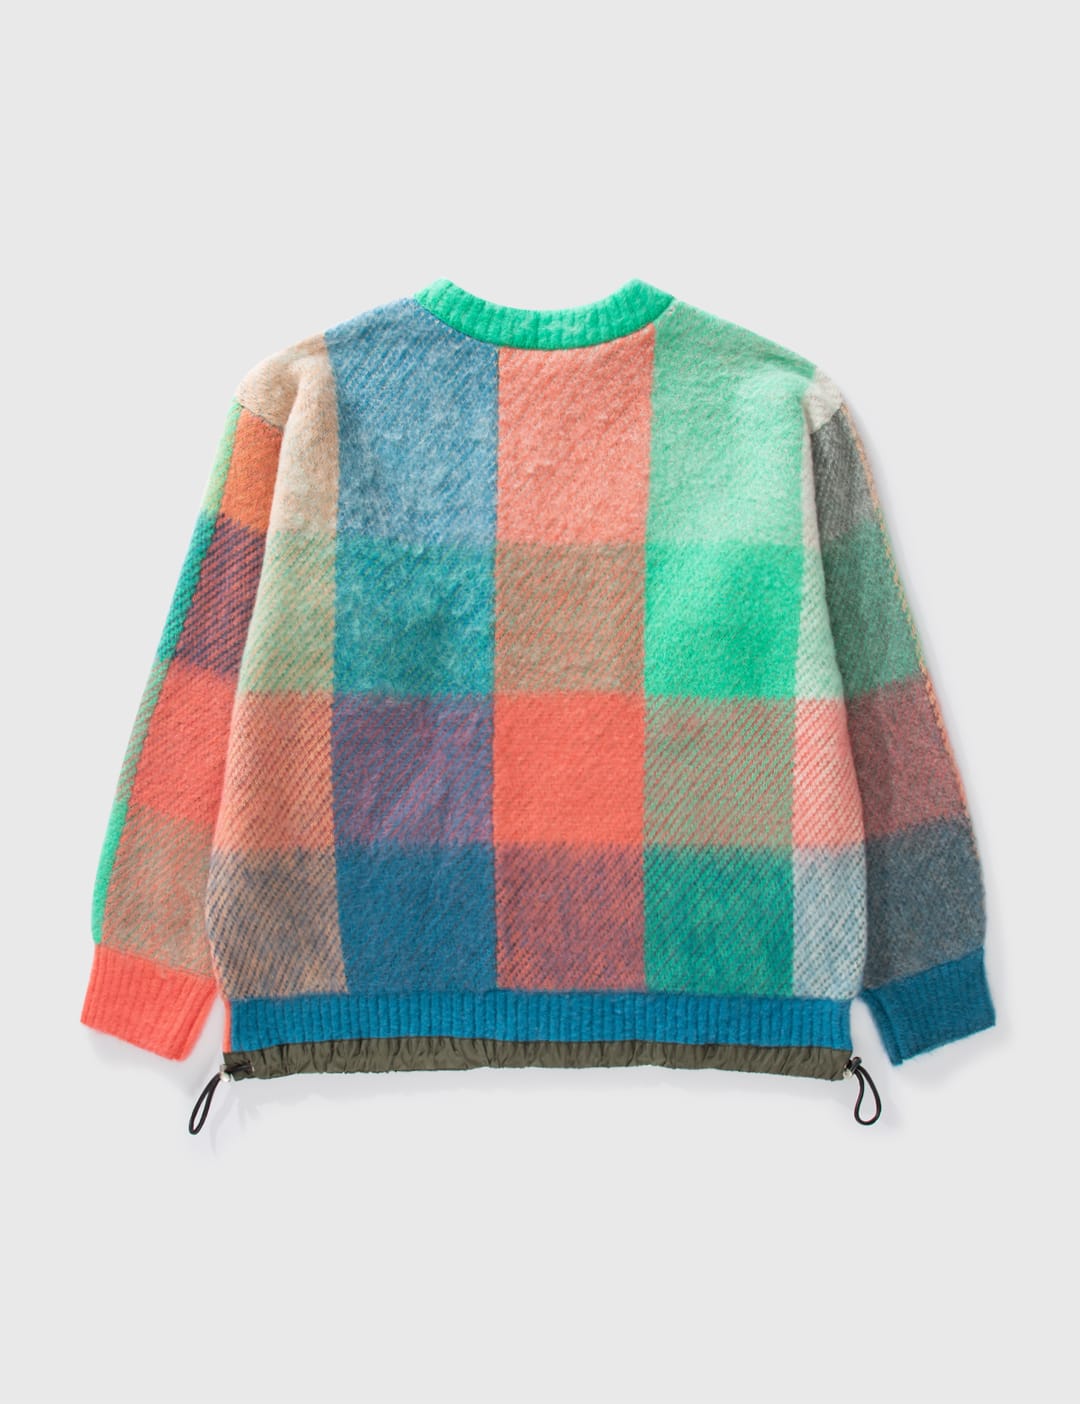 Sacai - Plaid Knit Pullover | HBX - Globally Curated Fashion and